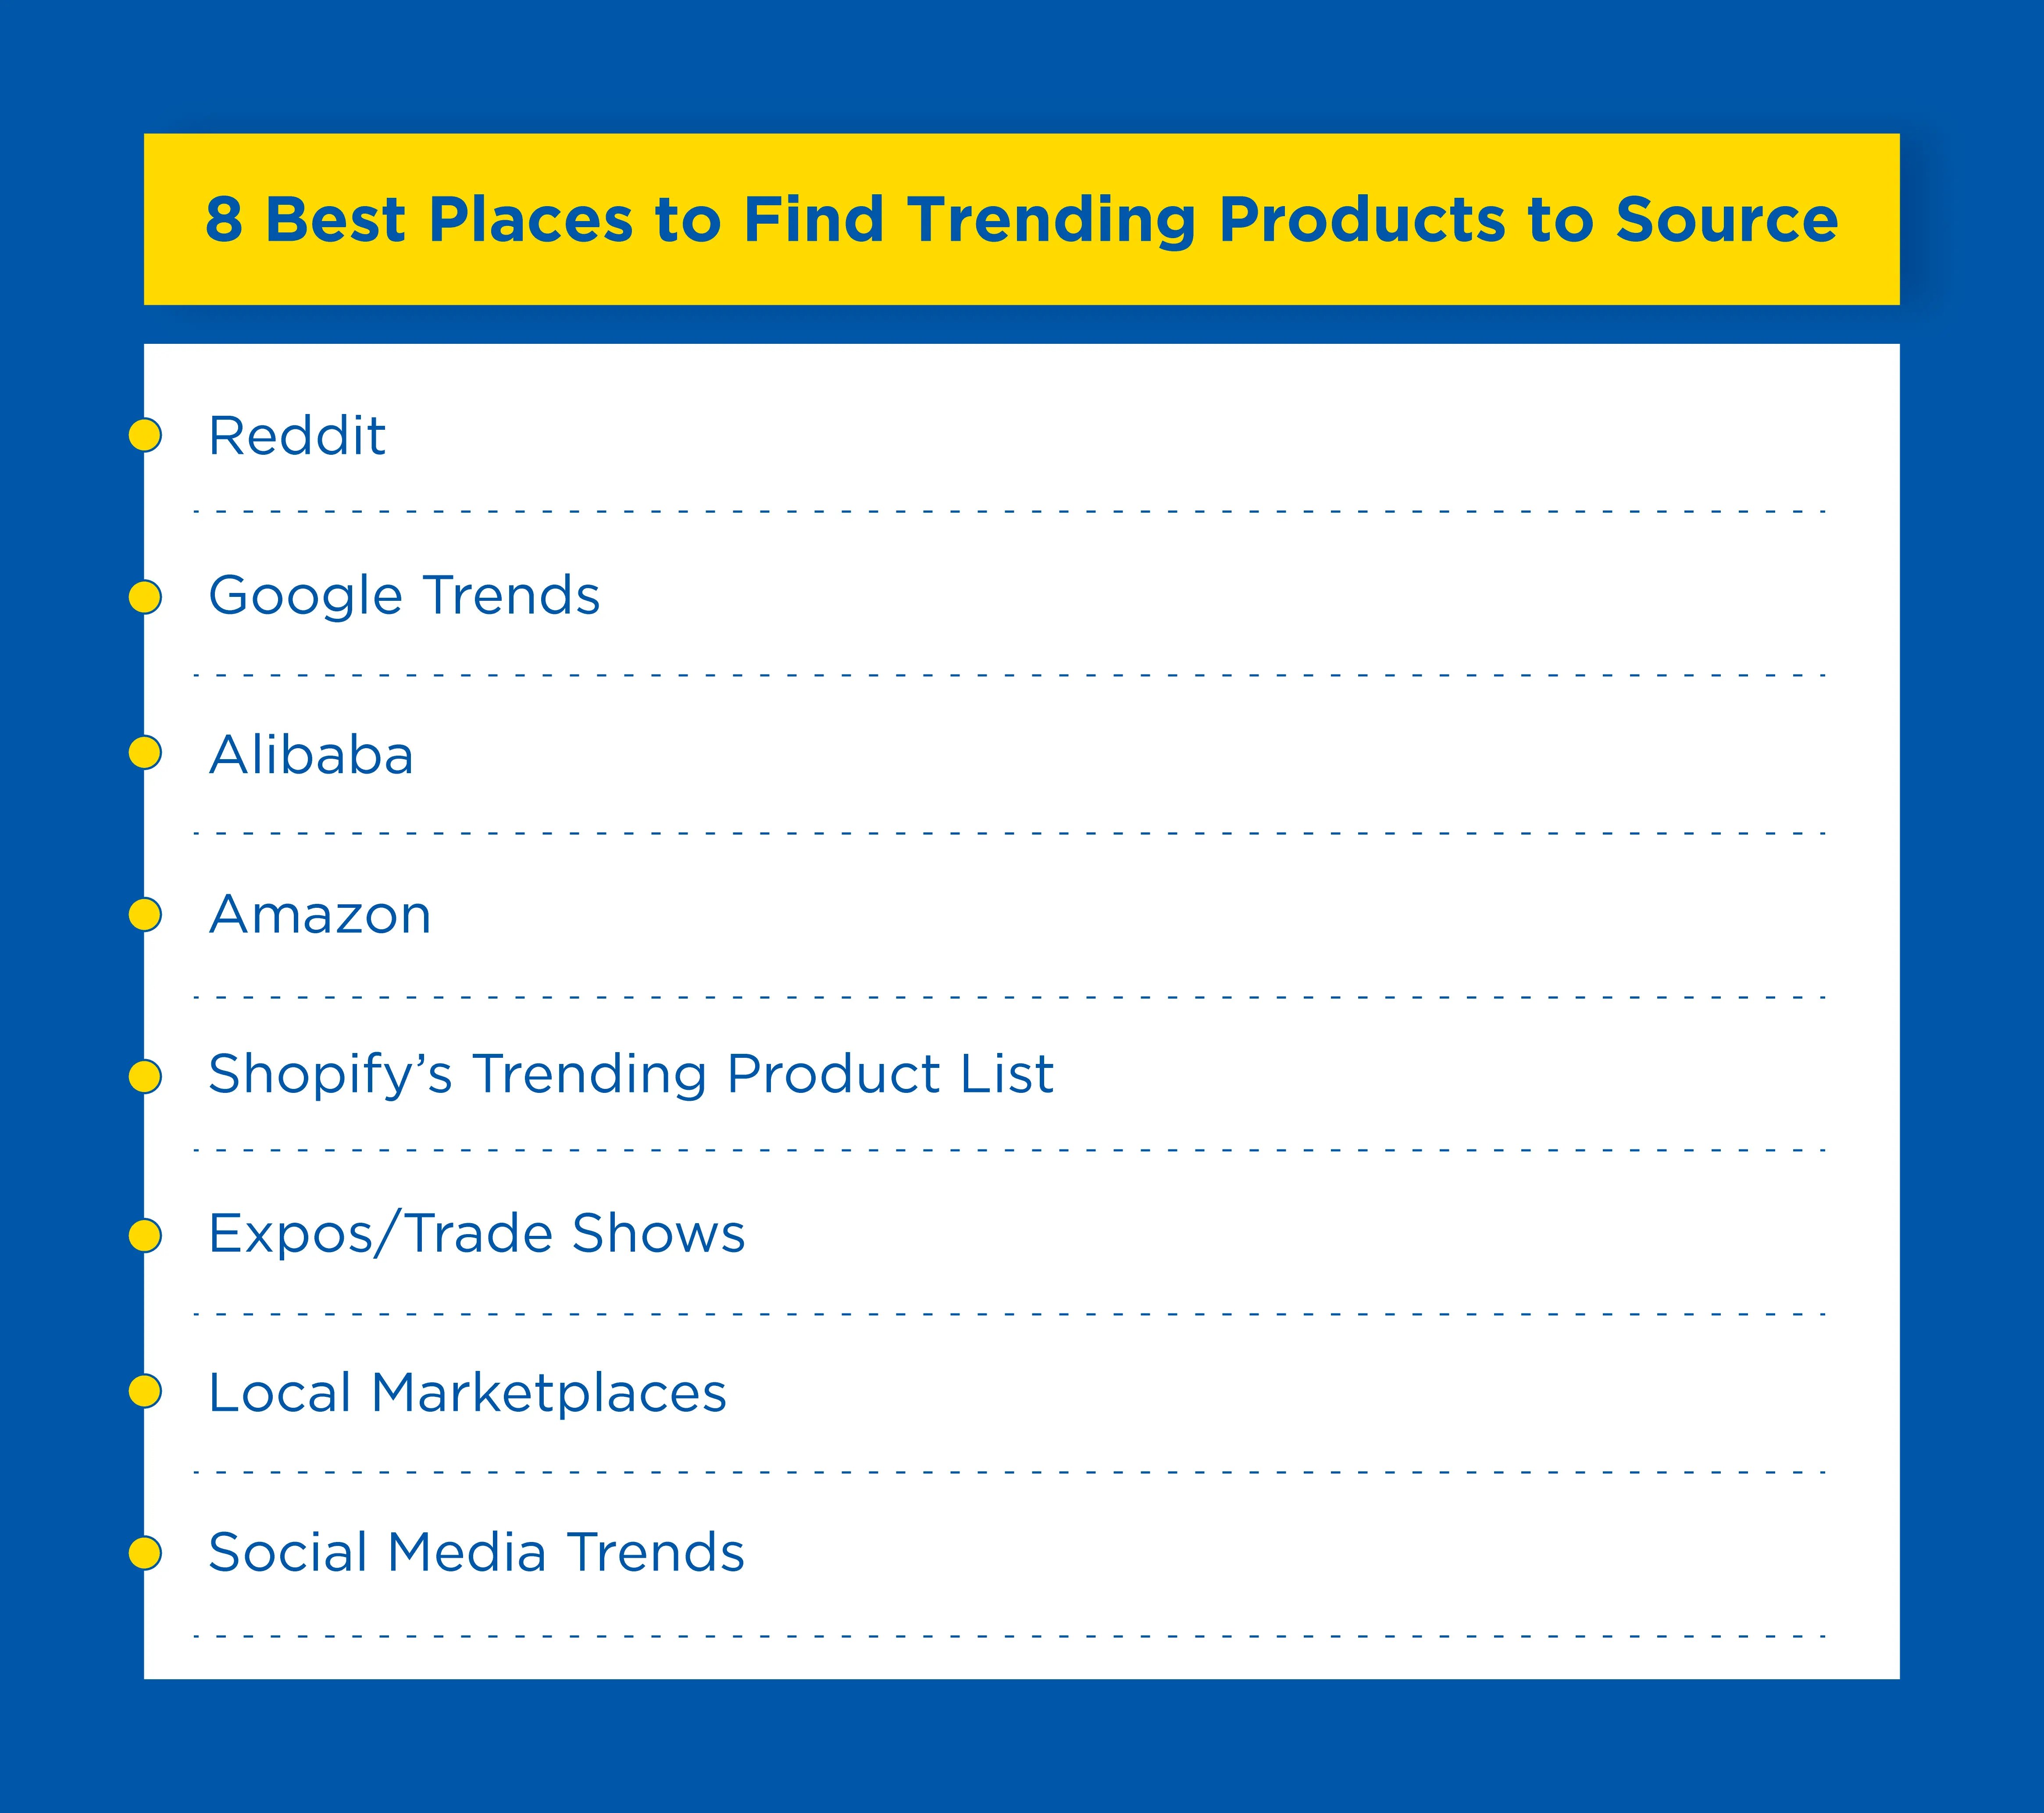 Best-Places-to-Find-Trending-Products-to-Source